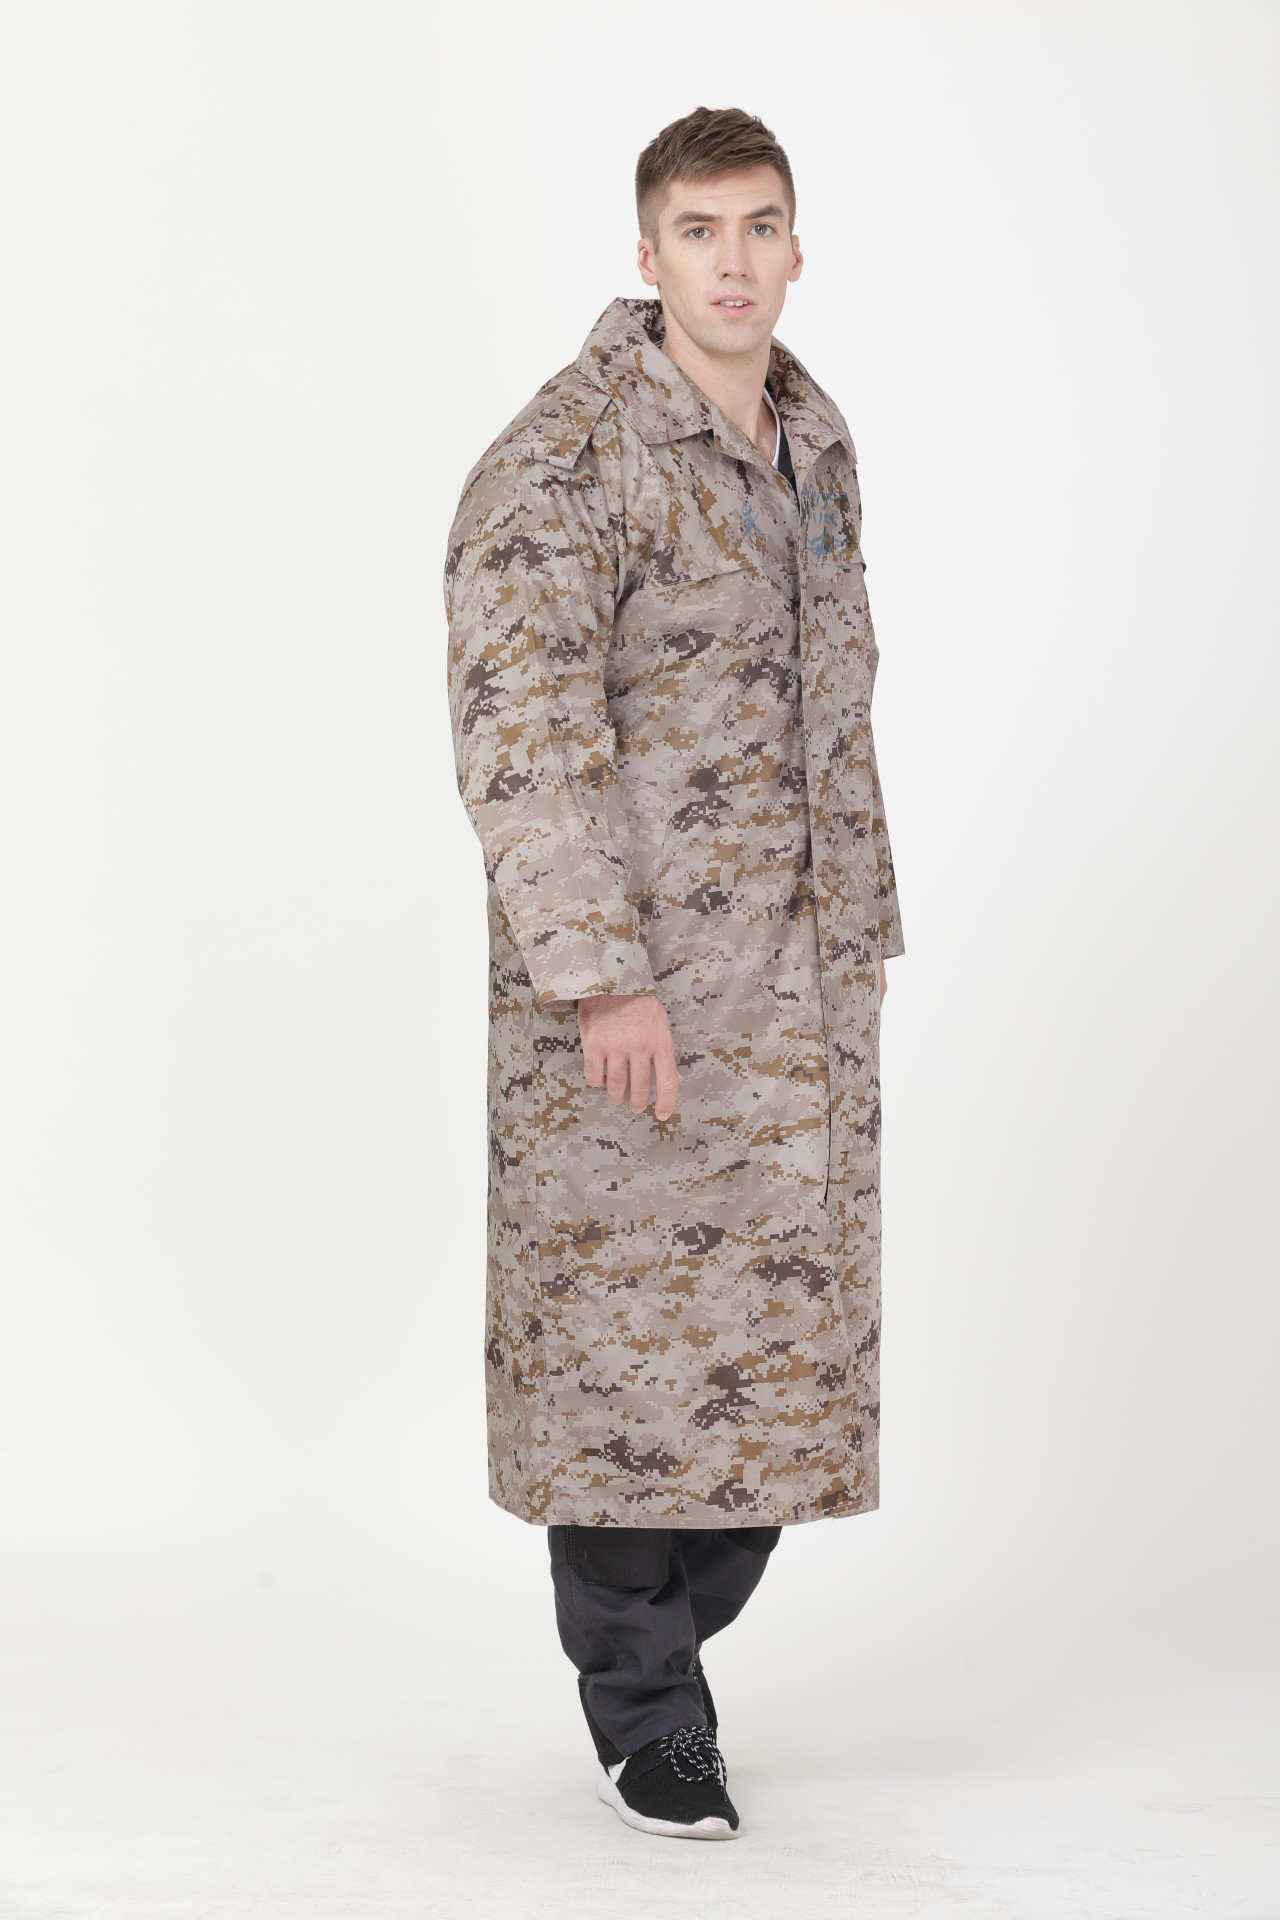 Best Waterproof Work Clothes Mens Long Raincoat With Hood / Lining Camouflage Printed wholesale